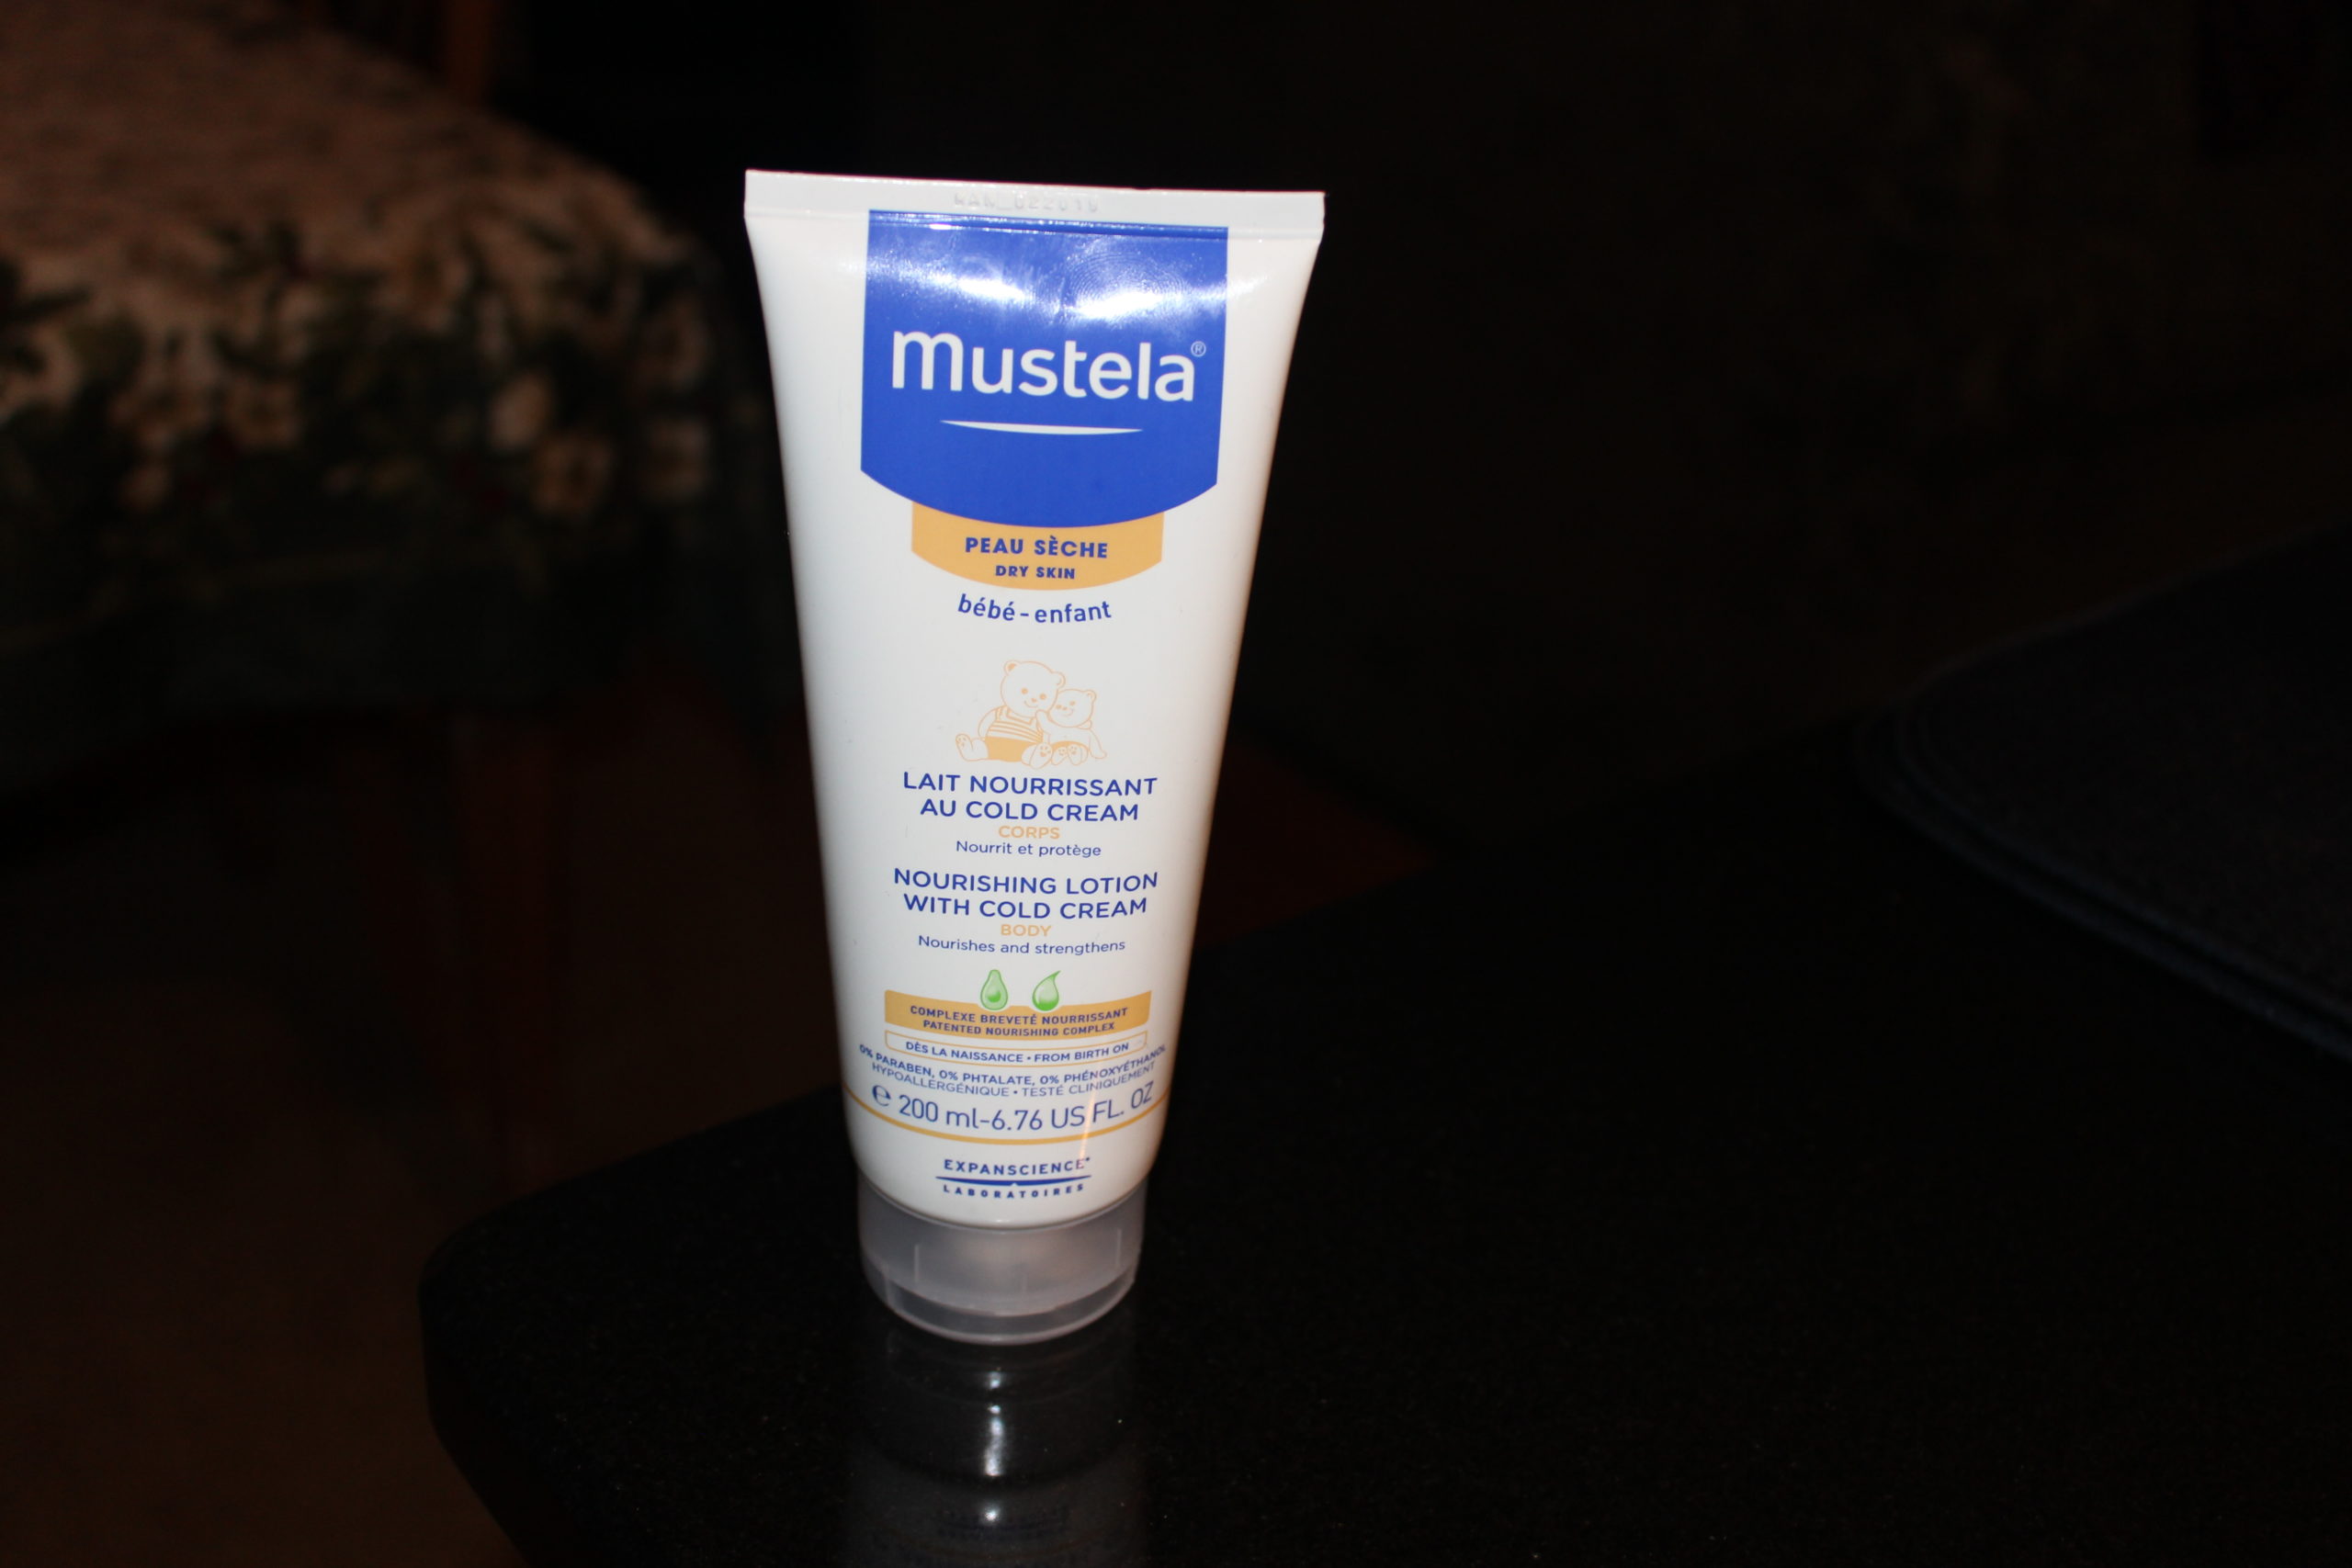 mustela nourishing lotion with cold cream